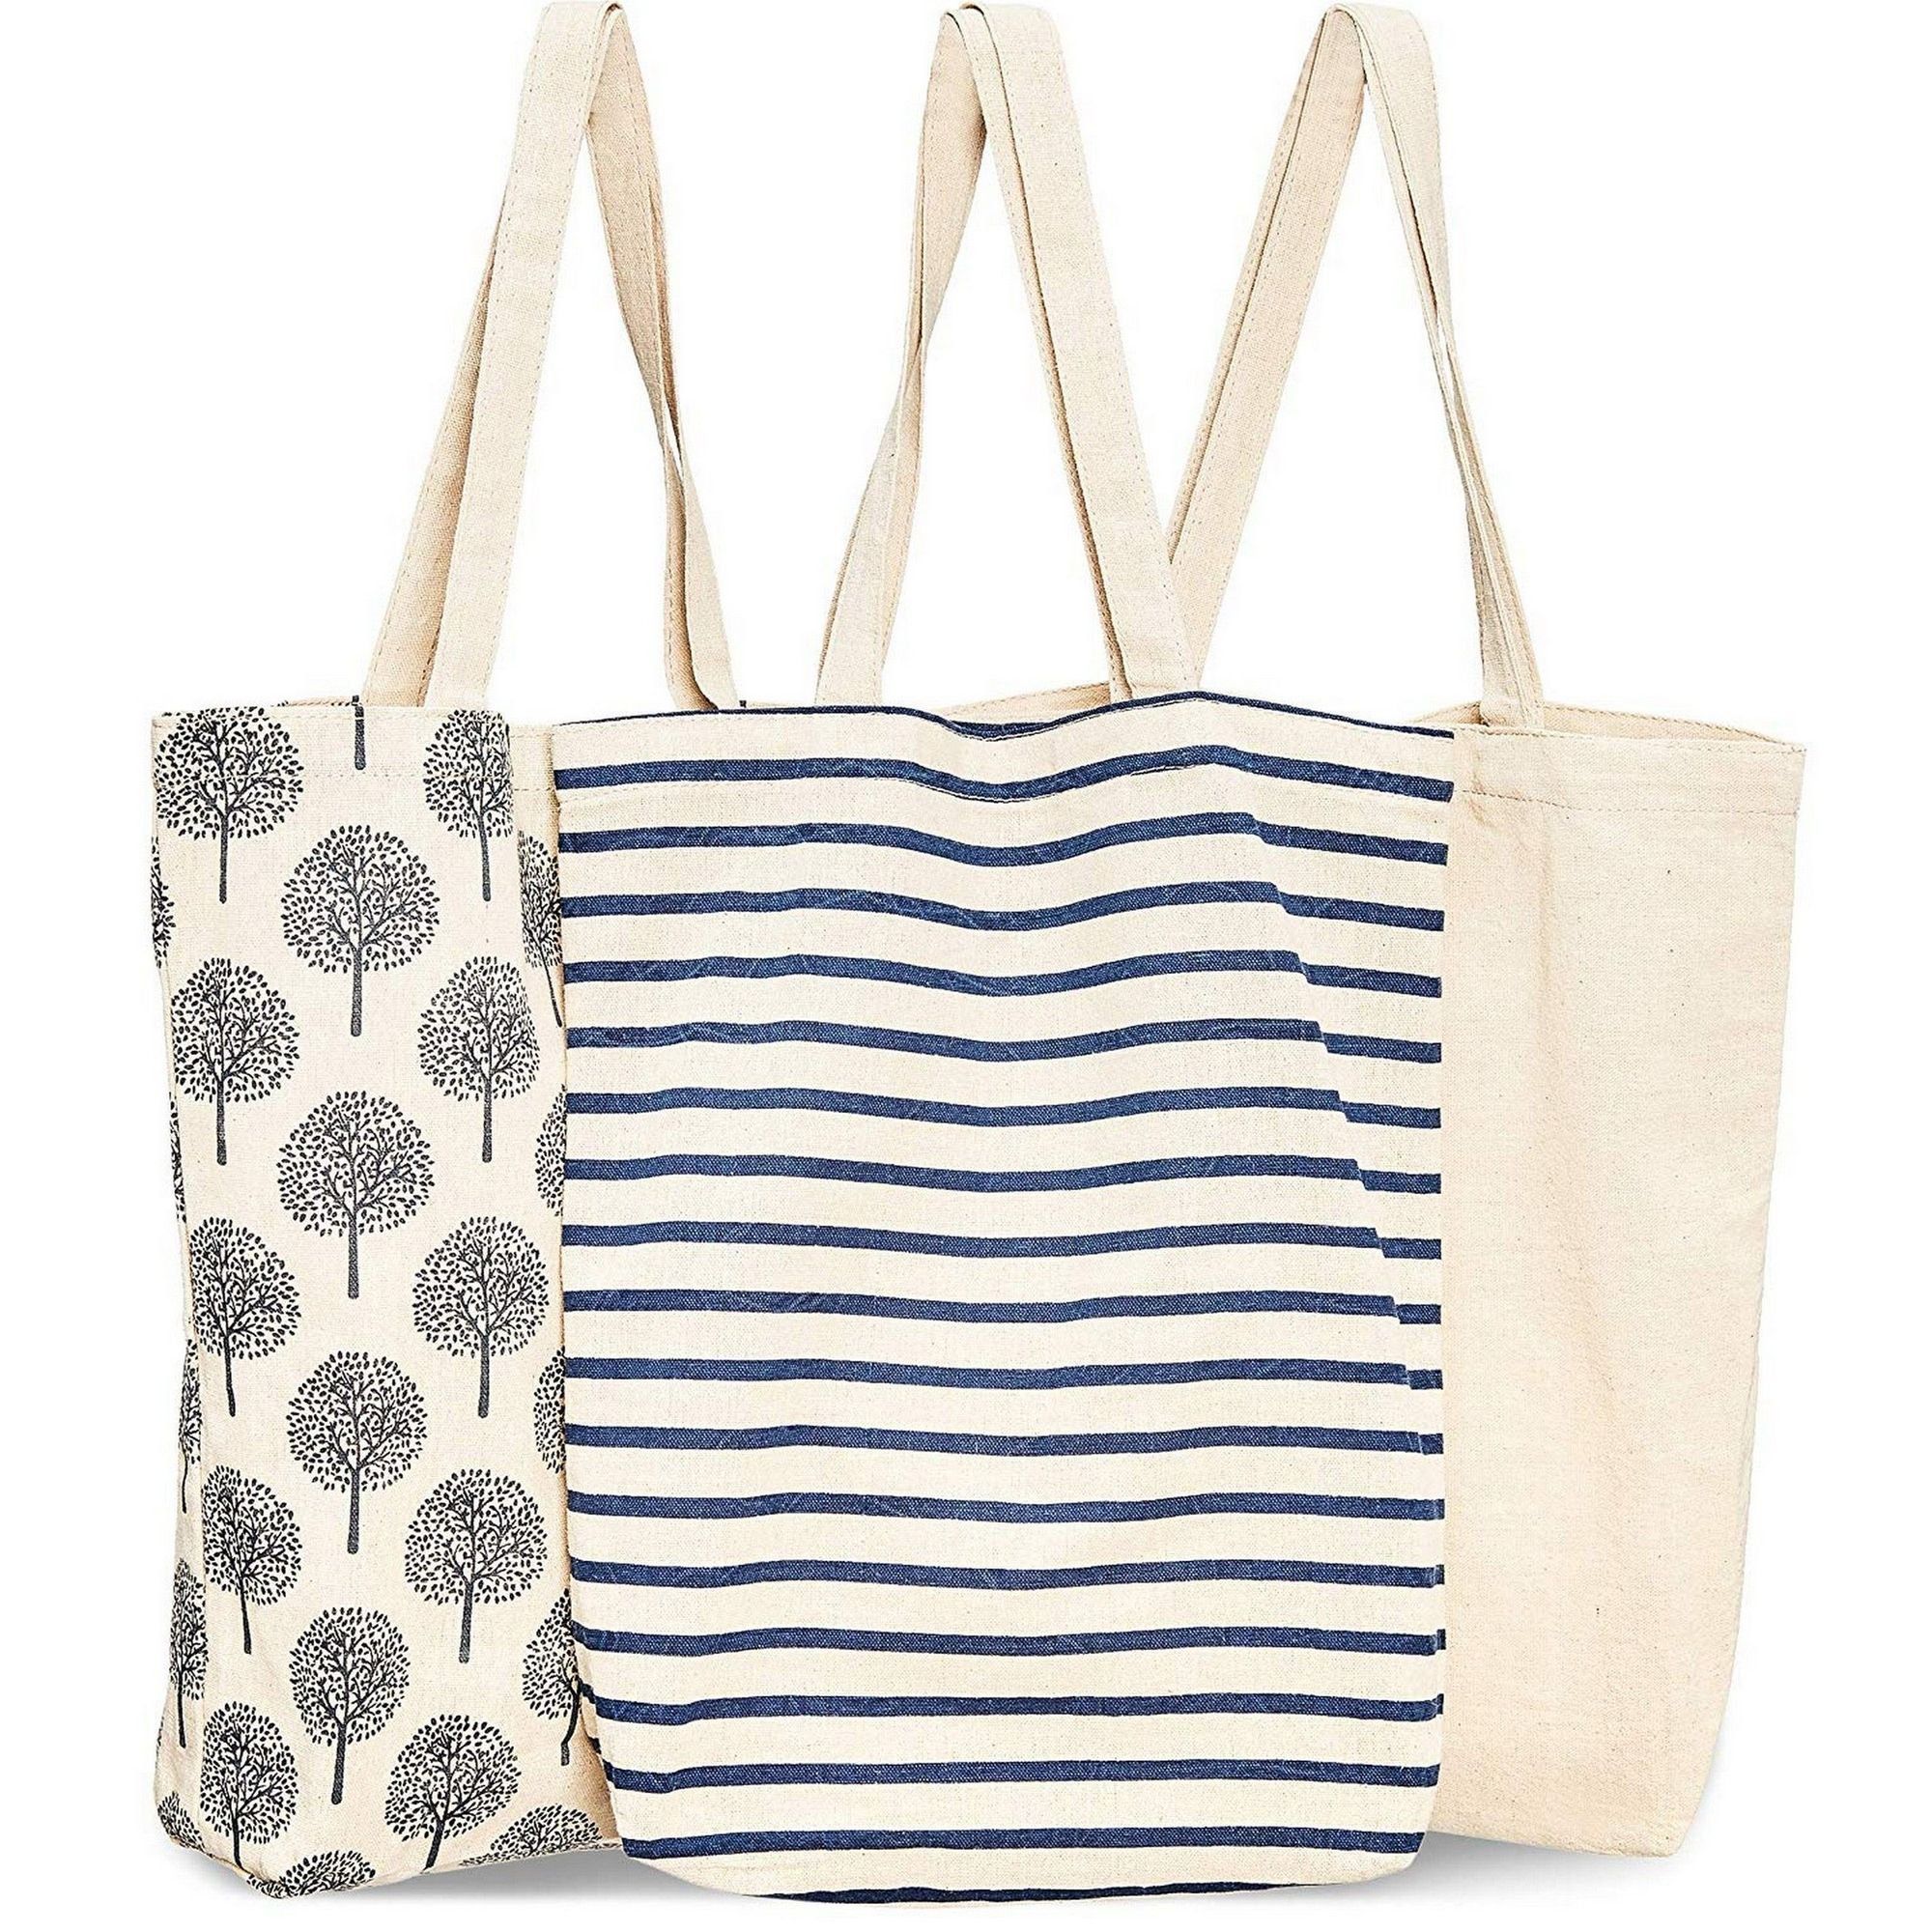 Juvale 3-Pack Reusable Cotton Grocery Shopping Tote Bags, 3 Designs, 15 x 16.5 x 3.5 inches | Walmart (US)